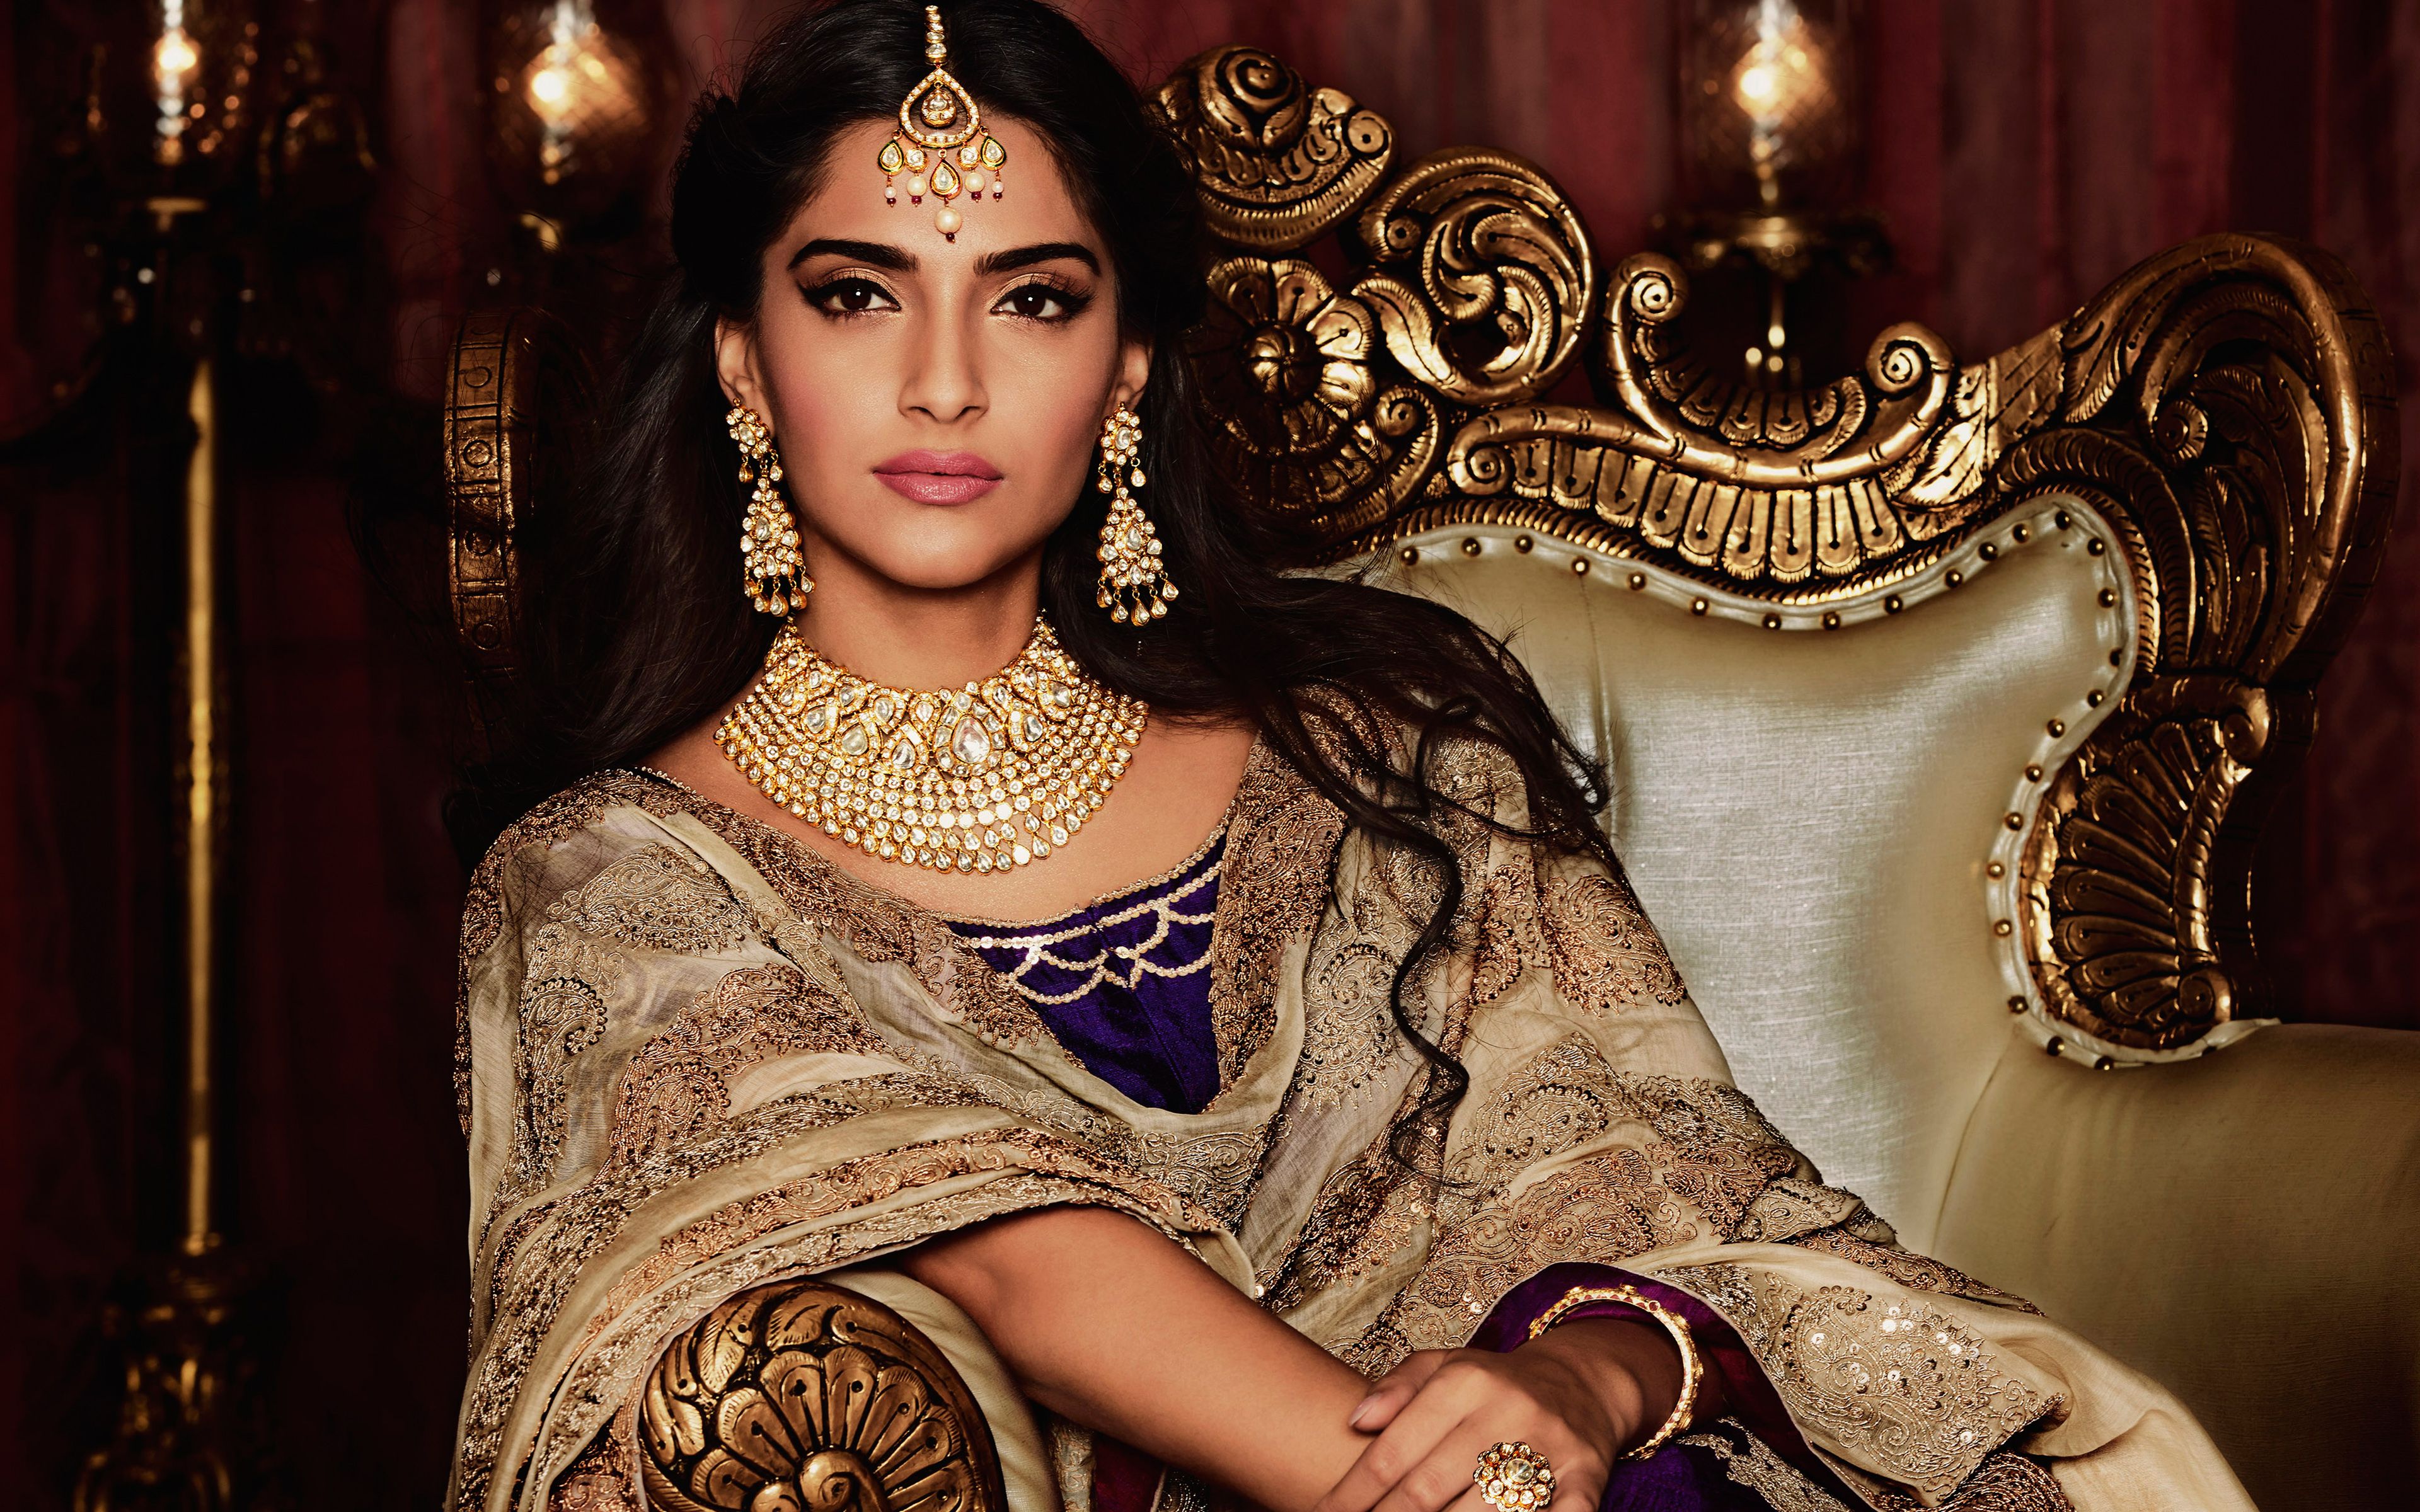 Download wallpaper Sonam Kapoor, Indian actress, 4k, Bollywood, makeup, portrait, beautiful Indian outfit, Indian jewelry, brunette, Indian women for desktop with resolution 3840x2400. High Quality HD picture wallpaper